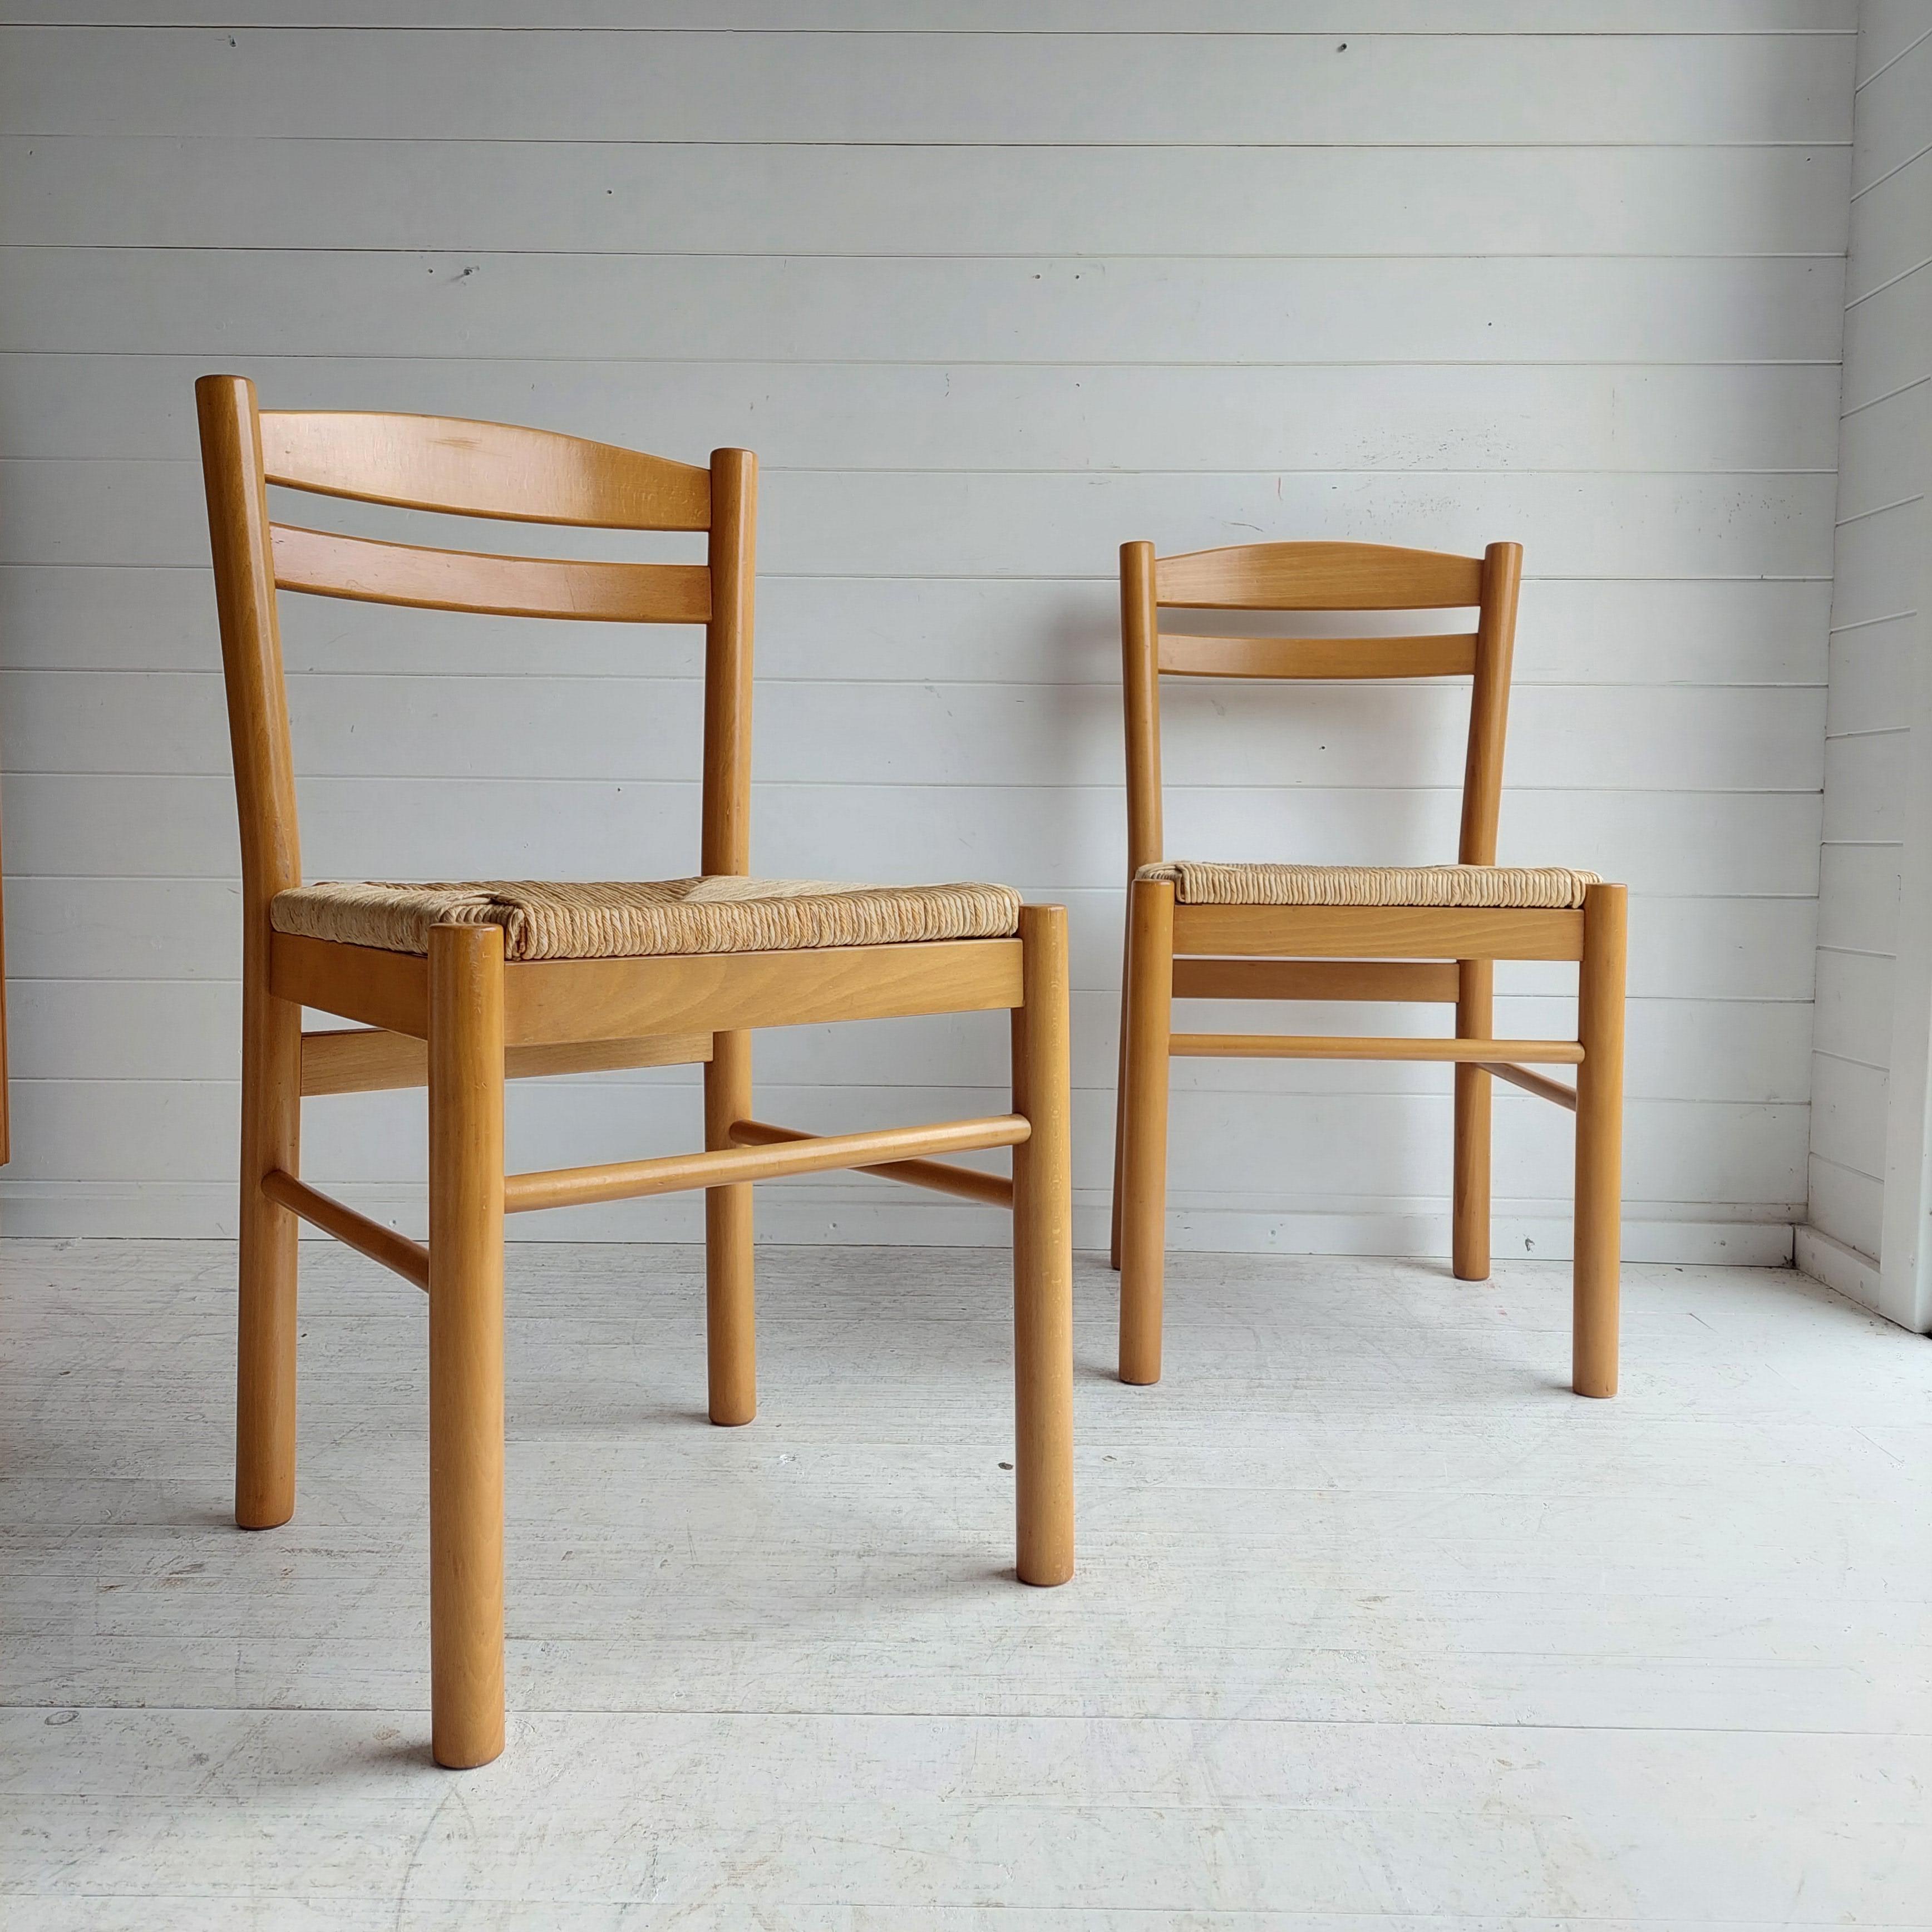 Gorgeous,  dining kitchen chairs in the style of Vico Magistretti. 
Most probably made in Italy.
Beautiful and elegant wood and rush Mid-Century-Modern design.
Nice and simple design. 
Would fit well in a natural soft interior with nude tones and